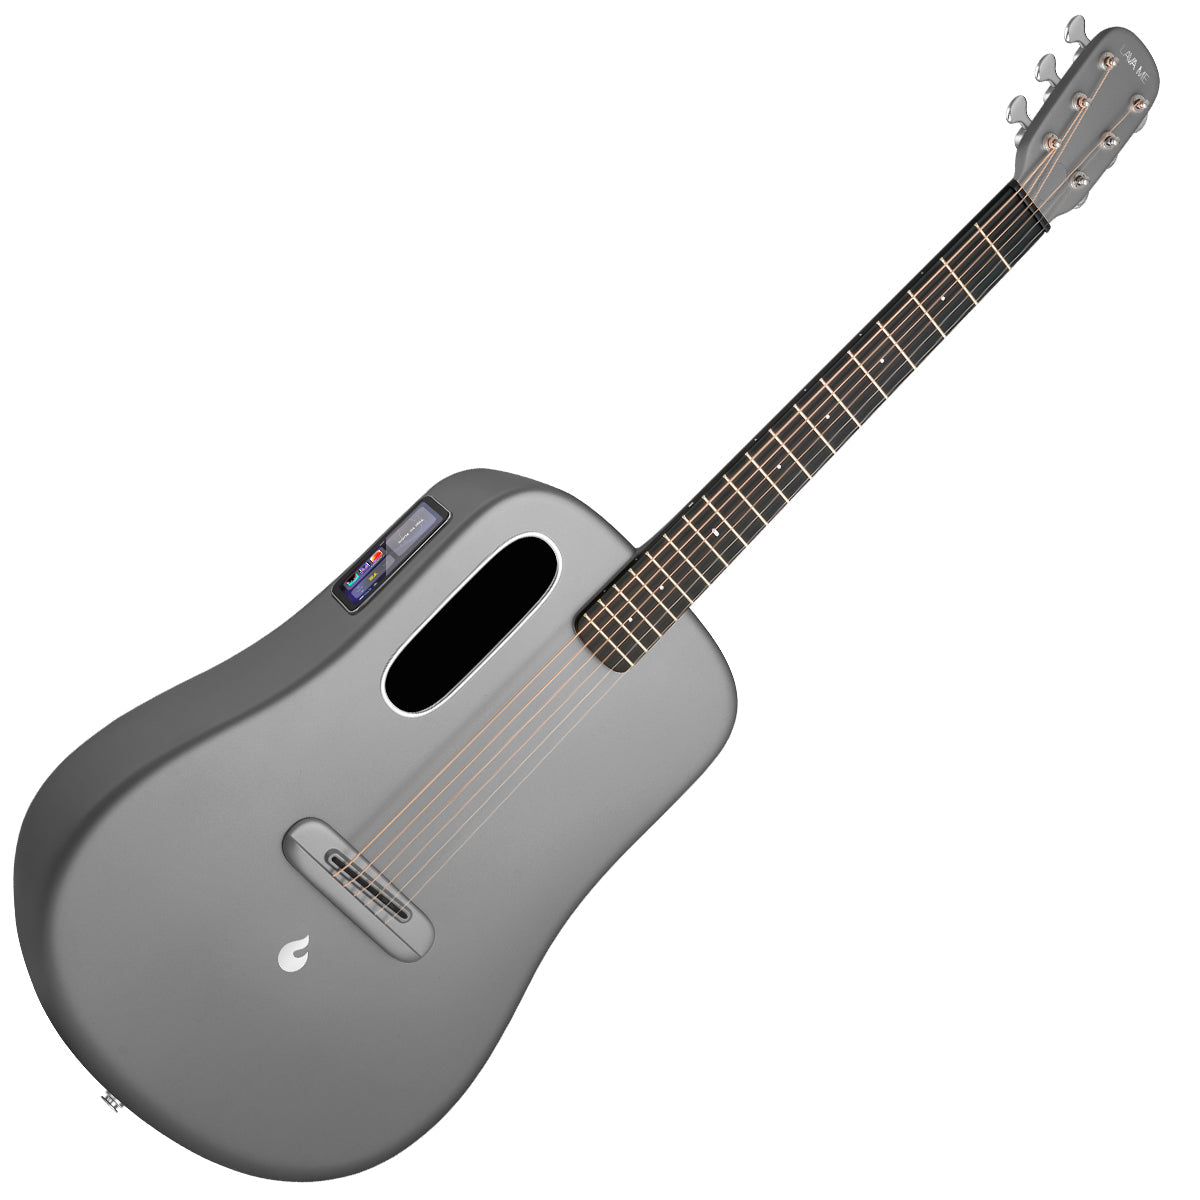 LAVA ME4 Carbon 38" with AirFlow Bag ~ Space Grey, Acoustic Guitar for sale at Richards Guitars.